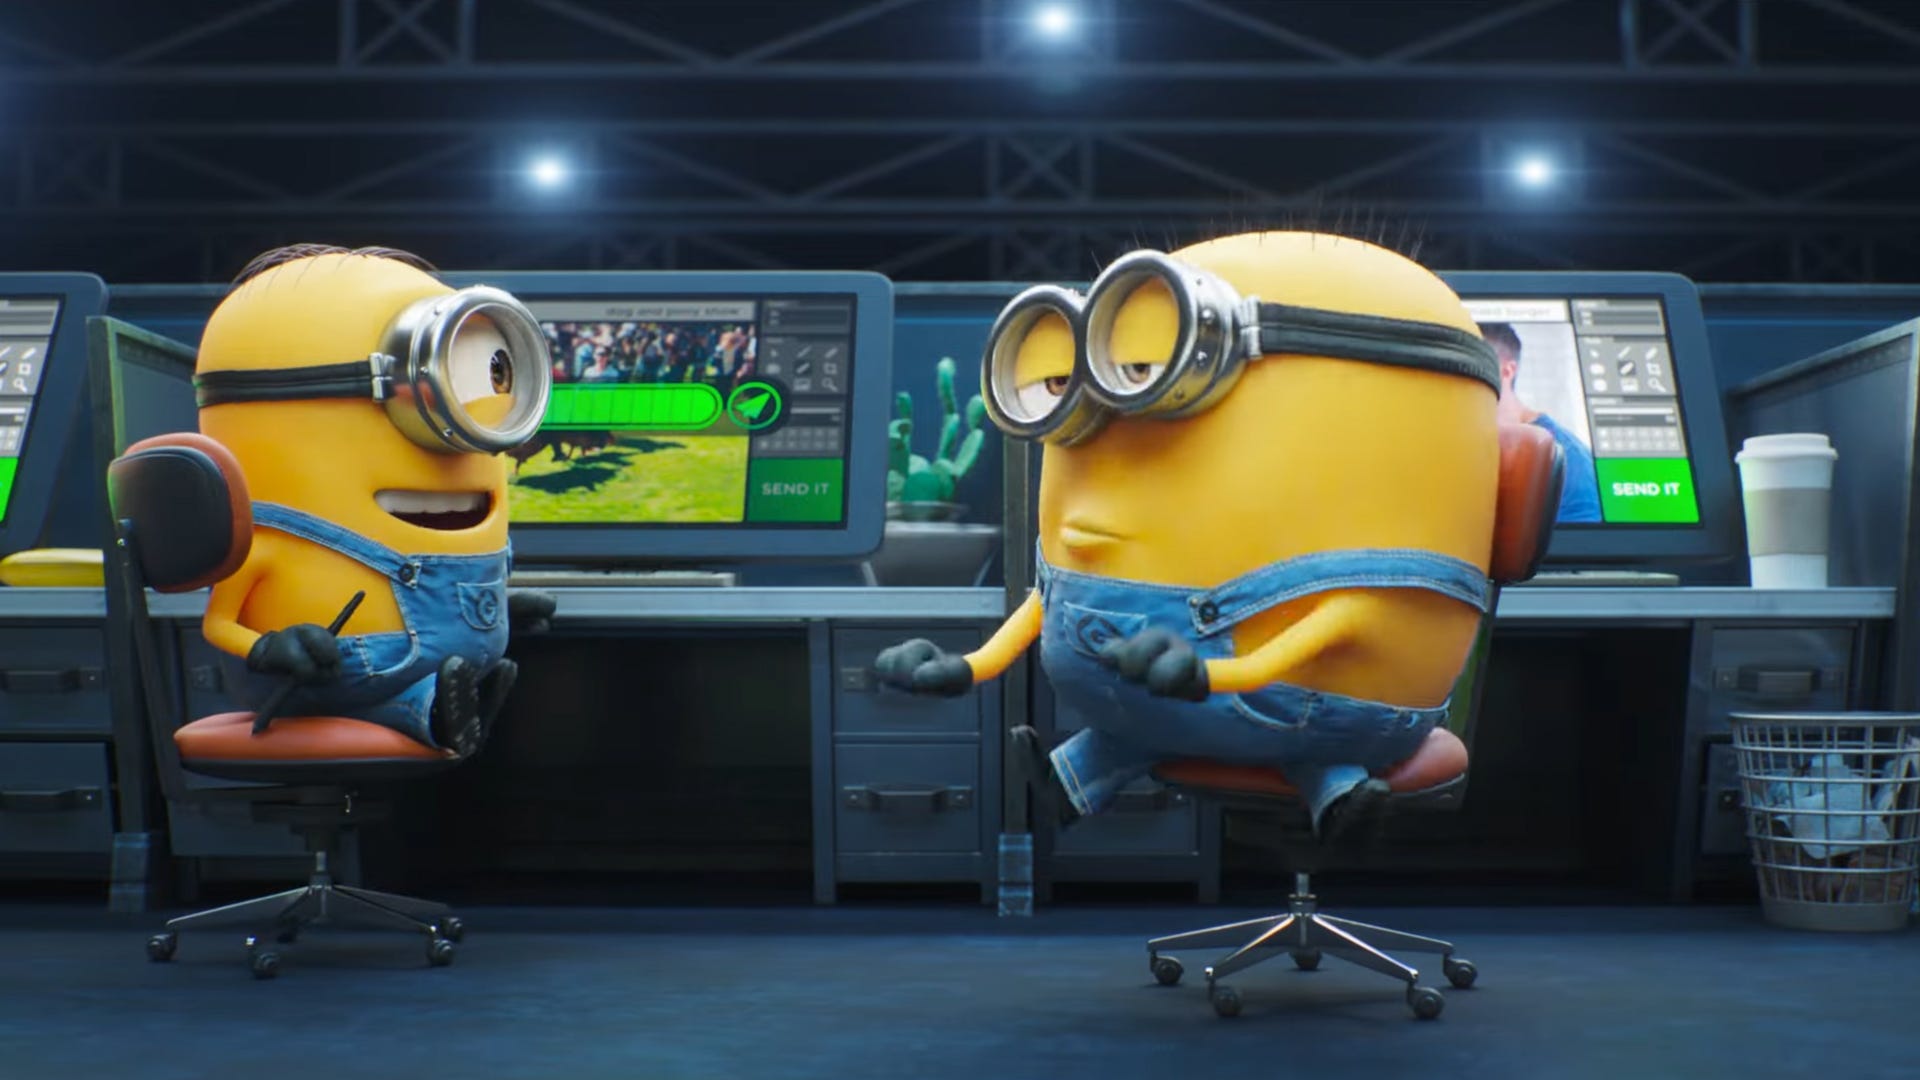 Despicable Me 4's Minions taking the mickey out of AI might just warm me up to the gibberish-spouting oddballs